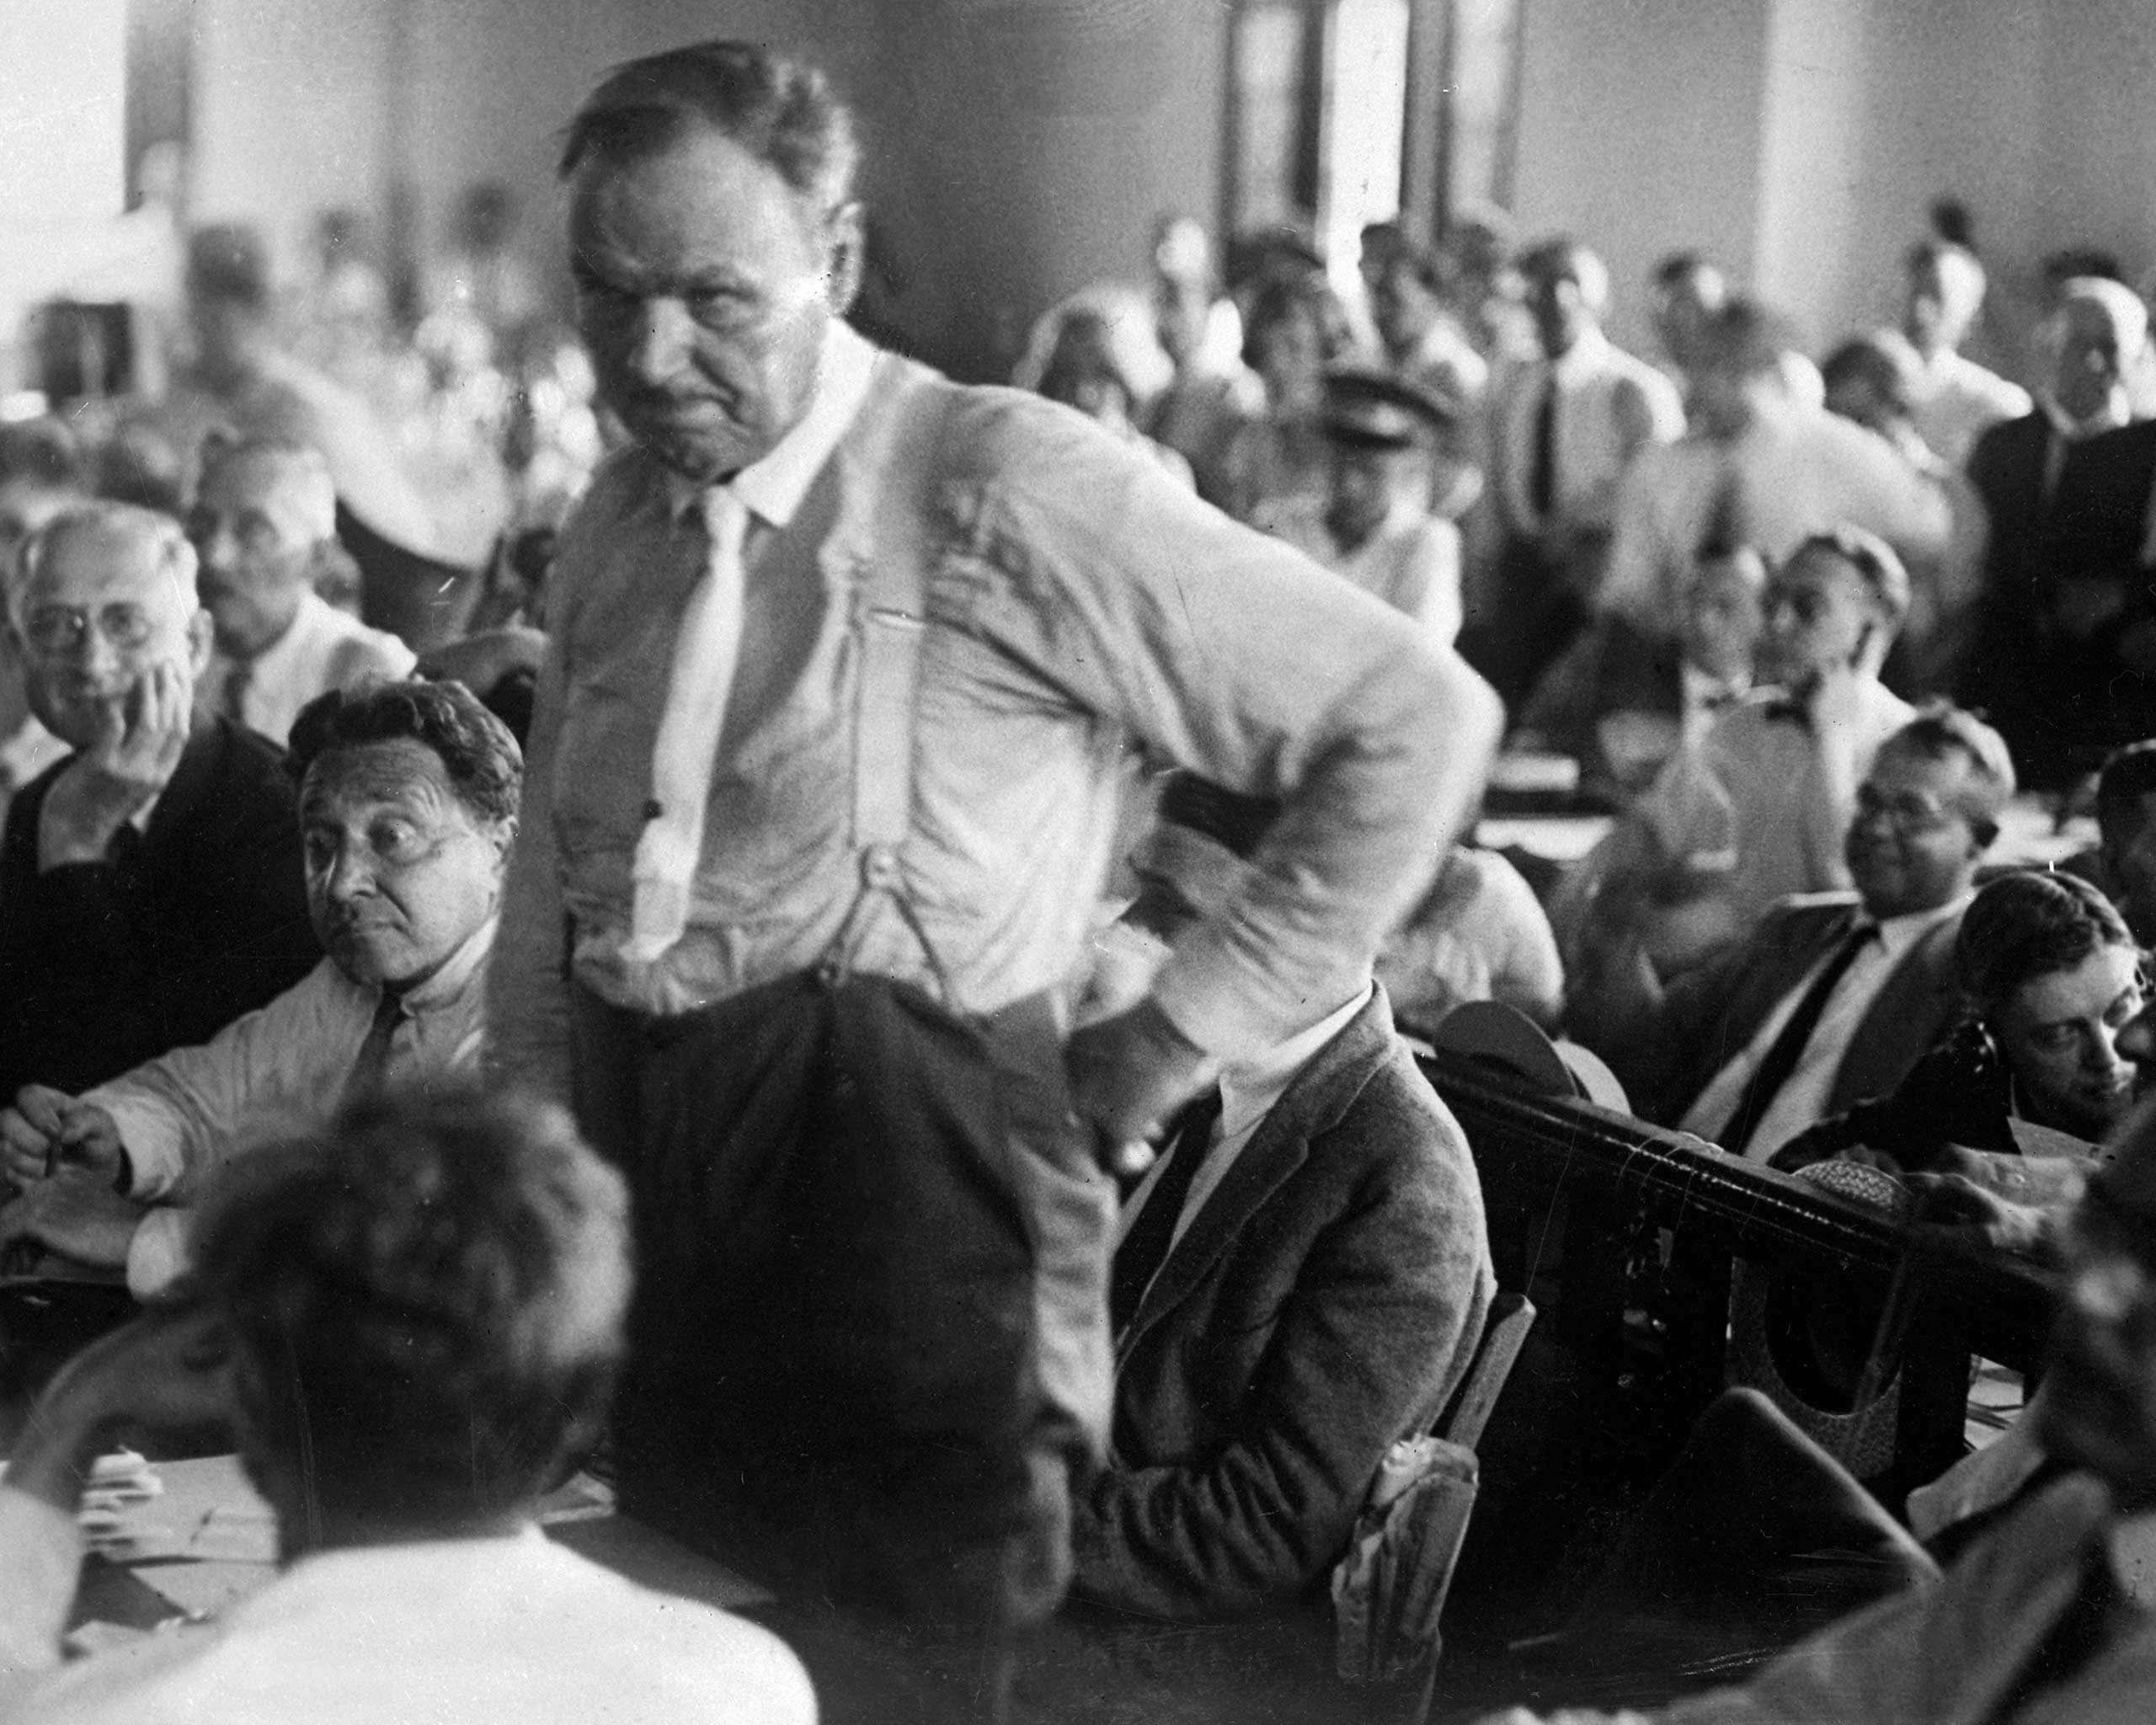 Attorney Clarence Darrow consults with Judge Raulston about procedure in the Tennessee courts during the trial of John T. Scopes. (New York Daily News/Getty Images)